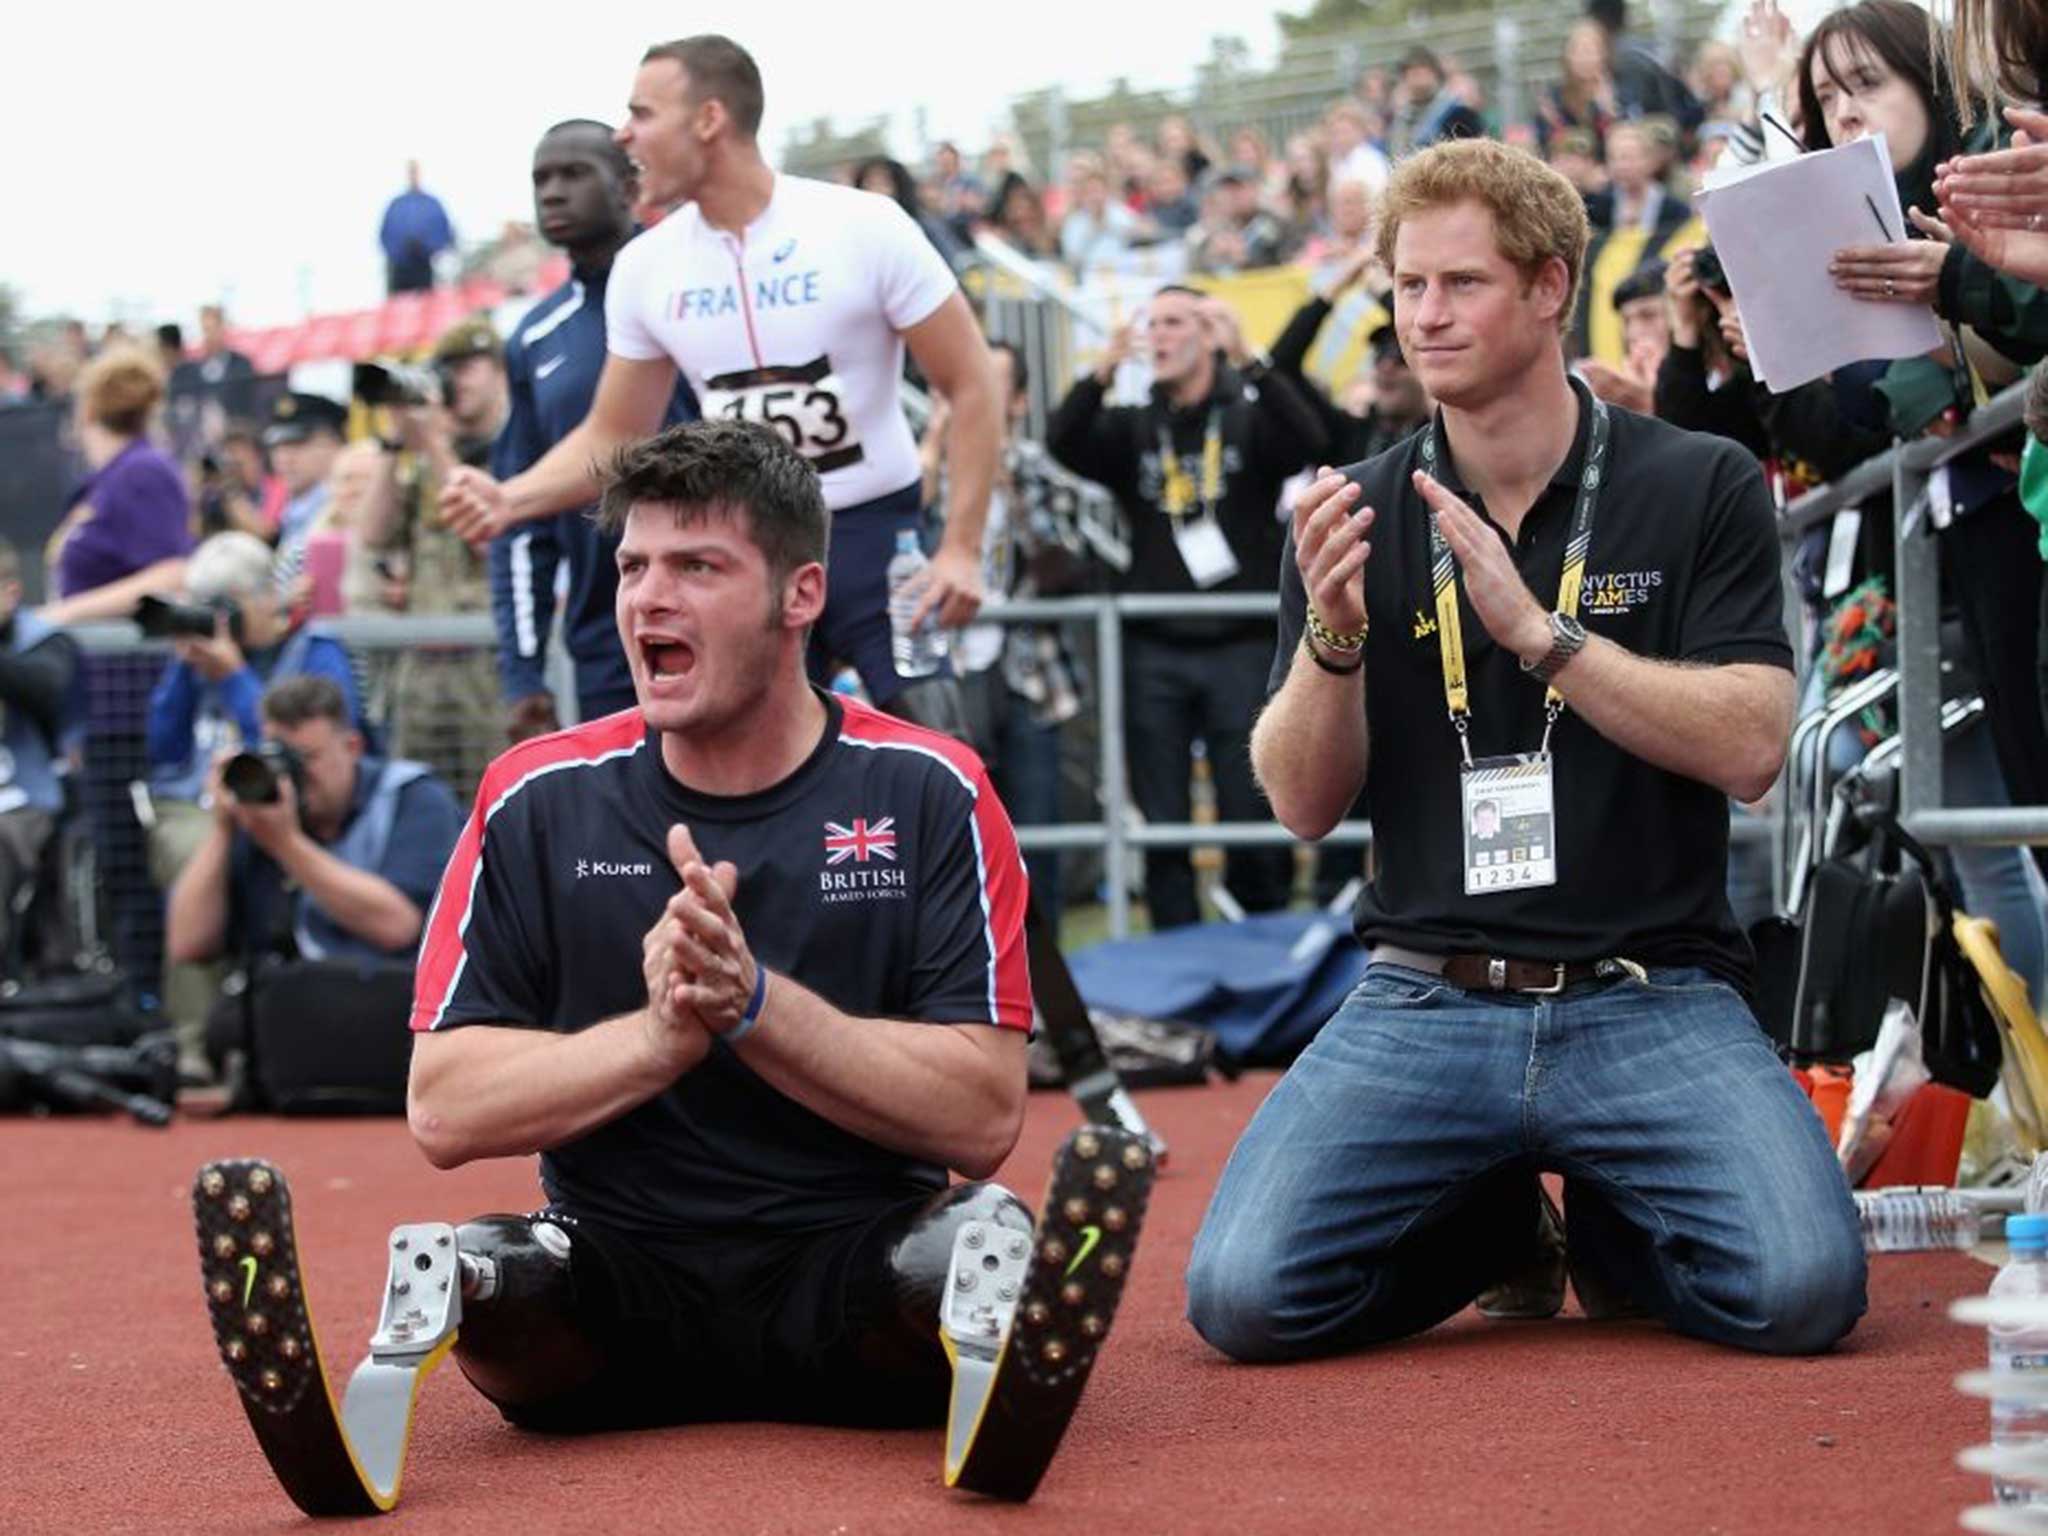 Prince Harry and British Invictus Captain Dave Henson cheer the athletes during the Invictus Games